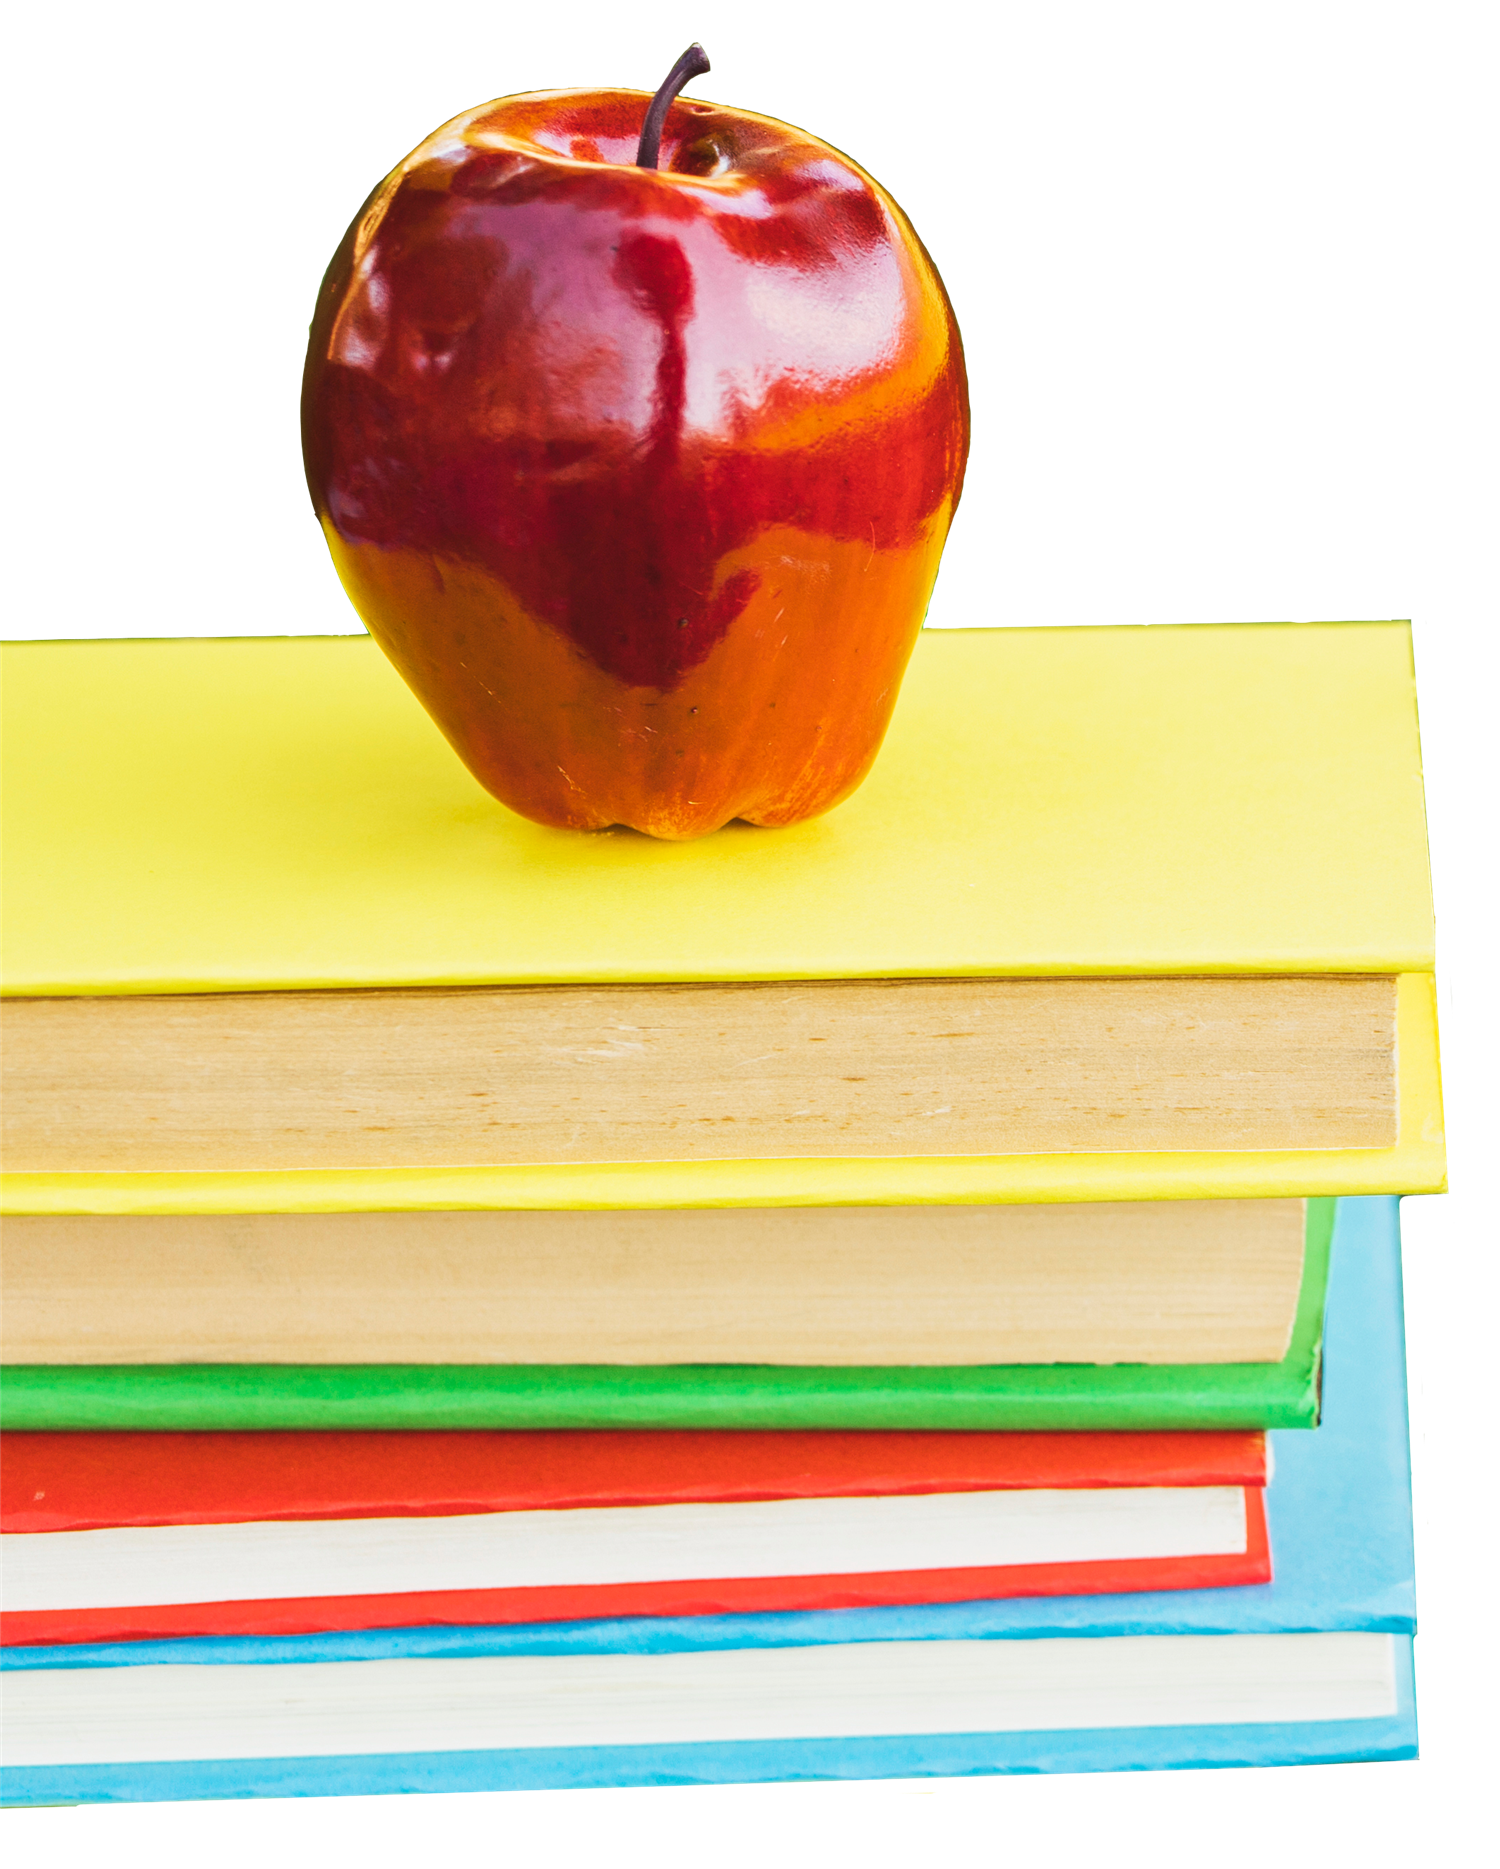 Stack of books with an apple on top